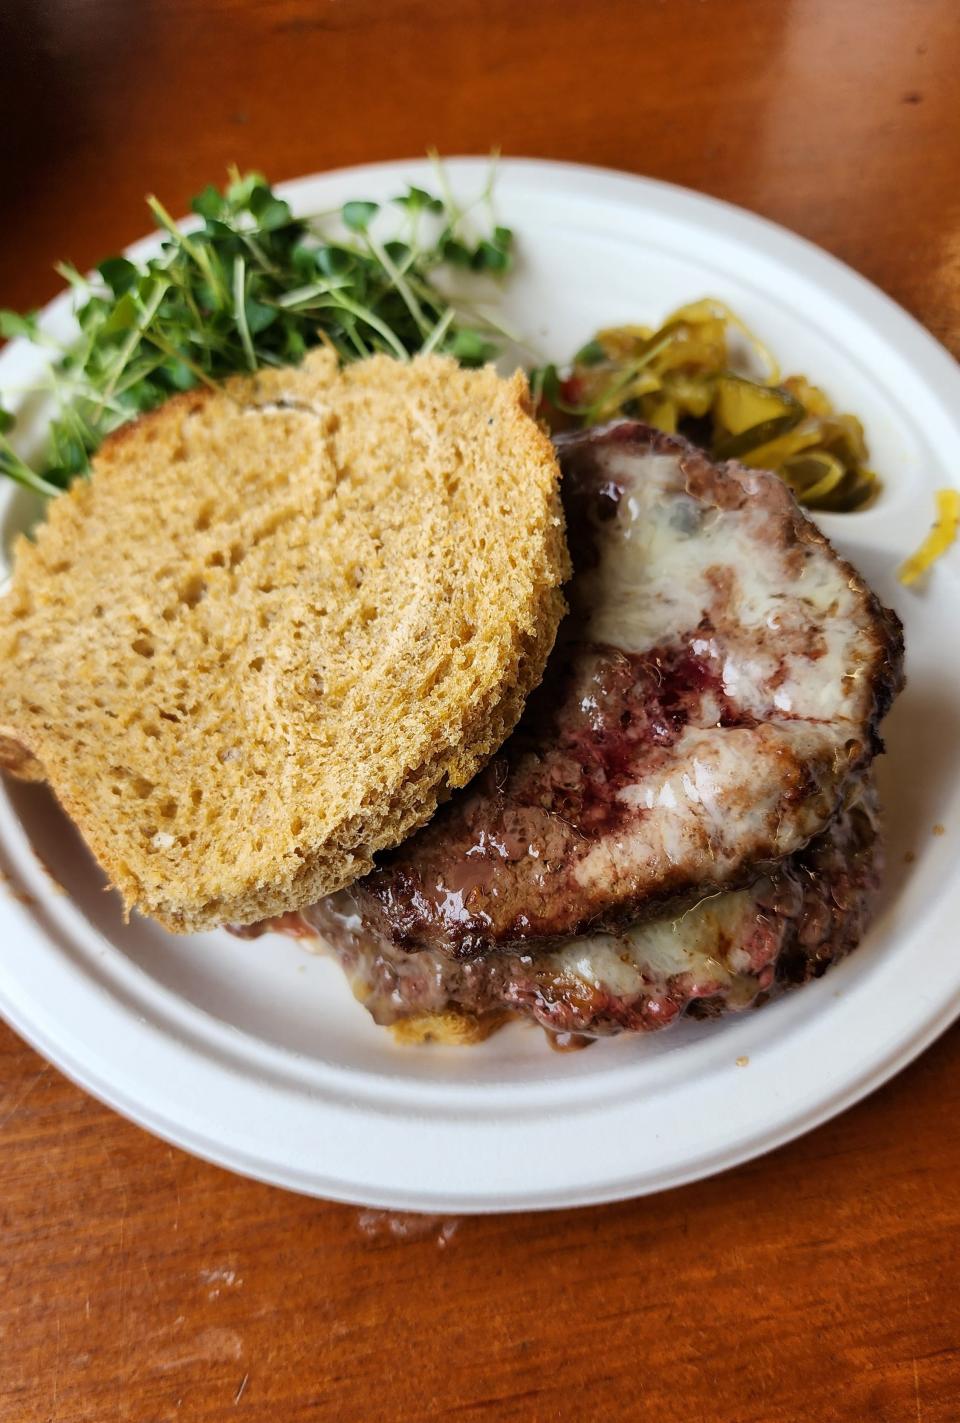 A burger at Nezinscot Farm Cafe comes with housemade pickles, bread and cheese and greens and beef grown on the farm.